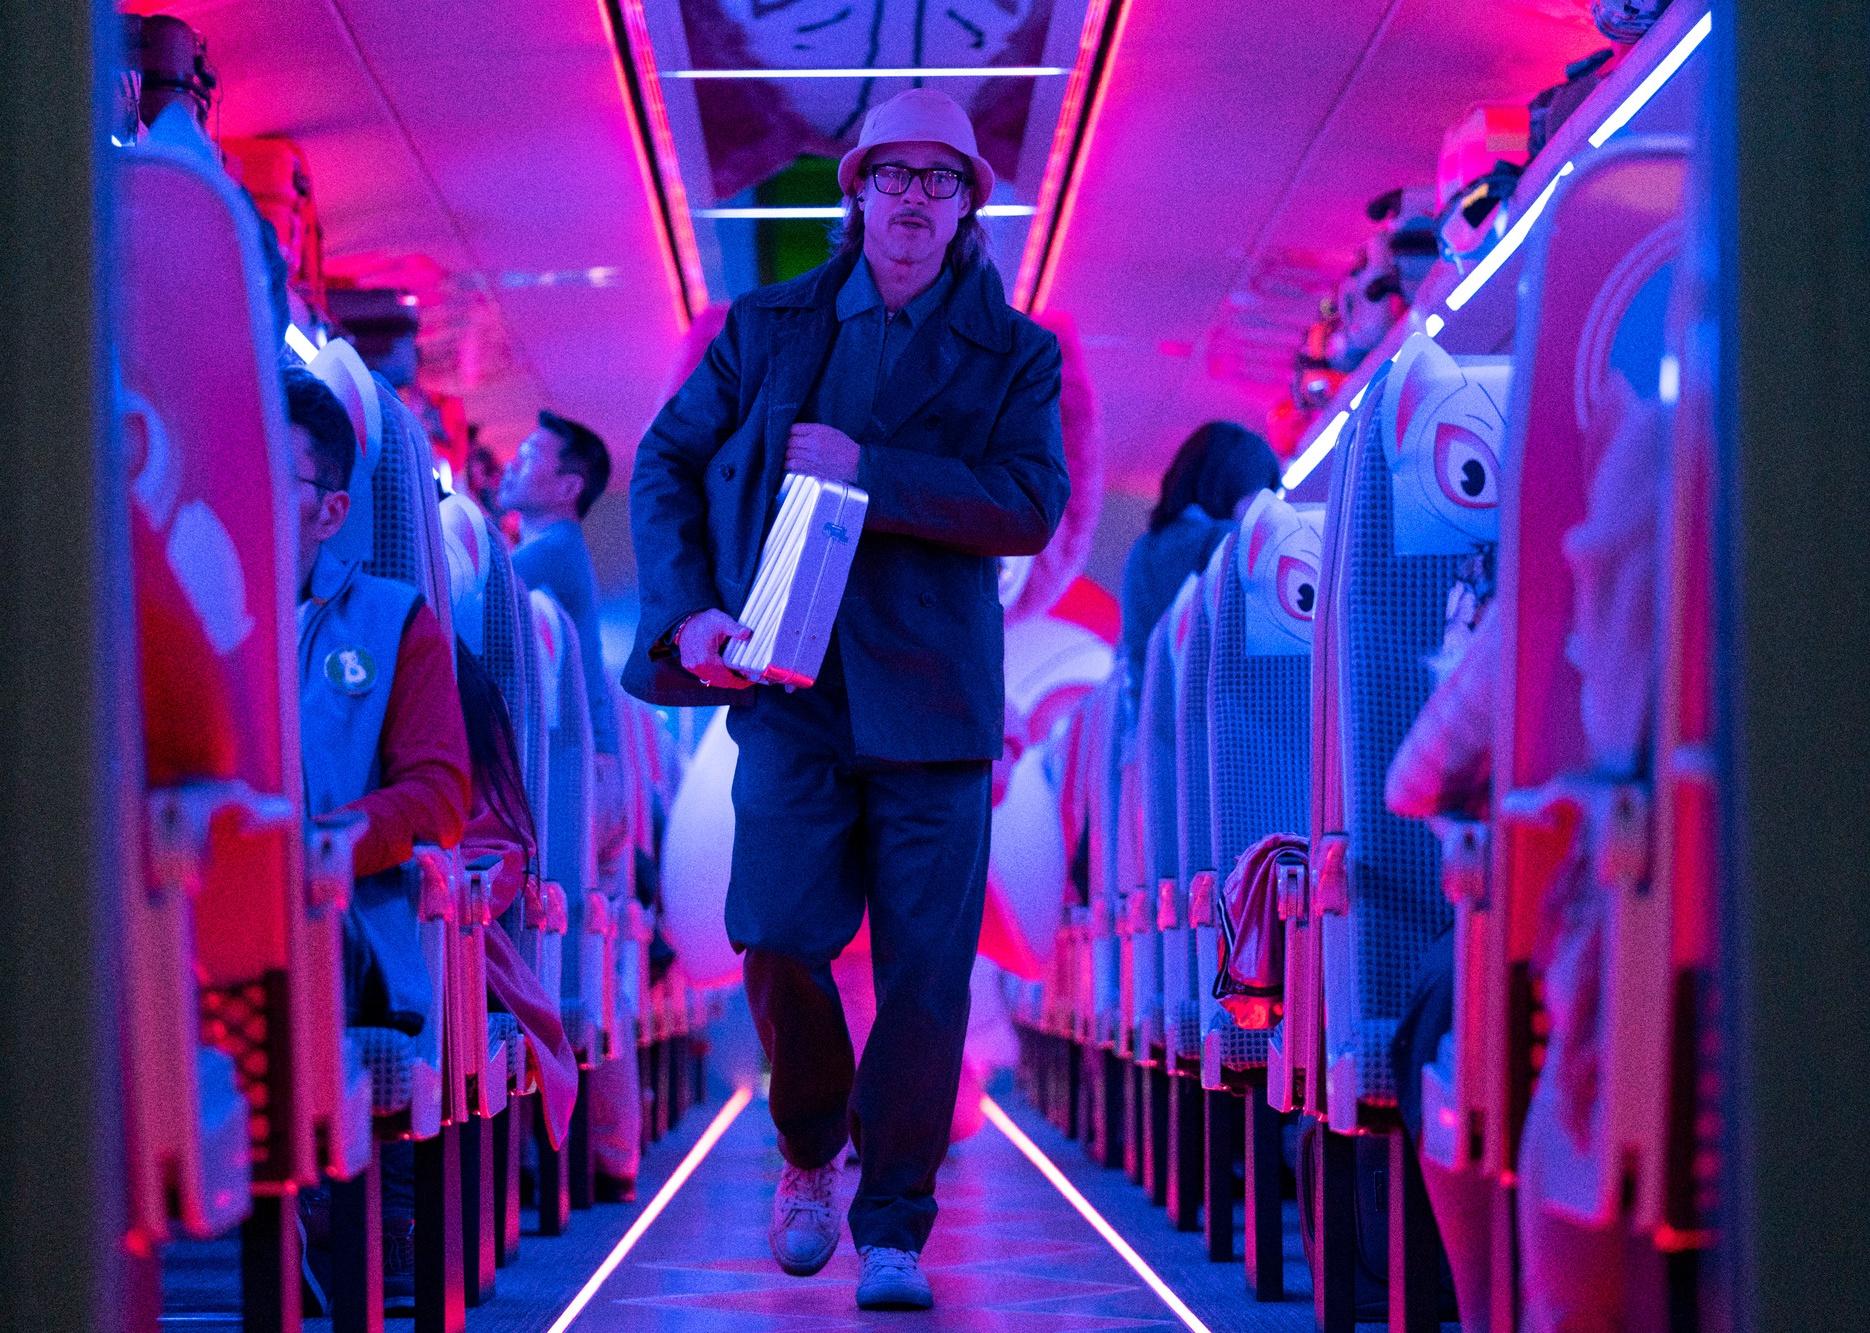 Brad Pitt walks through a crowded train in a bucket hat carrying a metal briefcase under blue and red lighting.